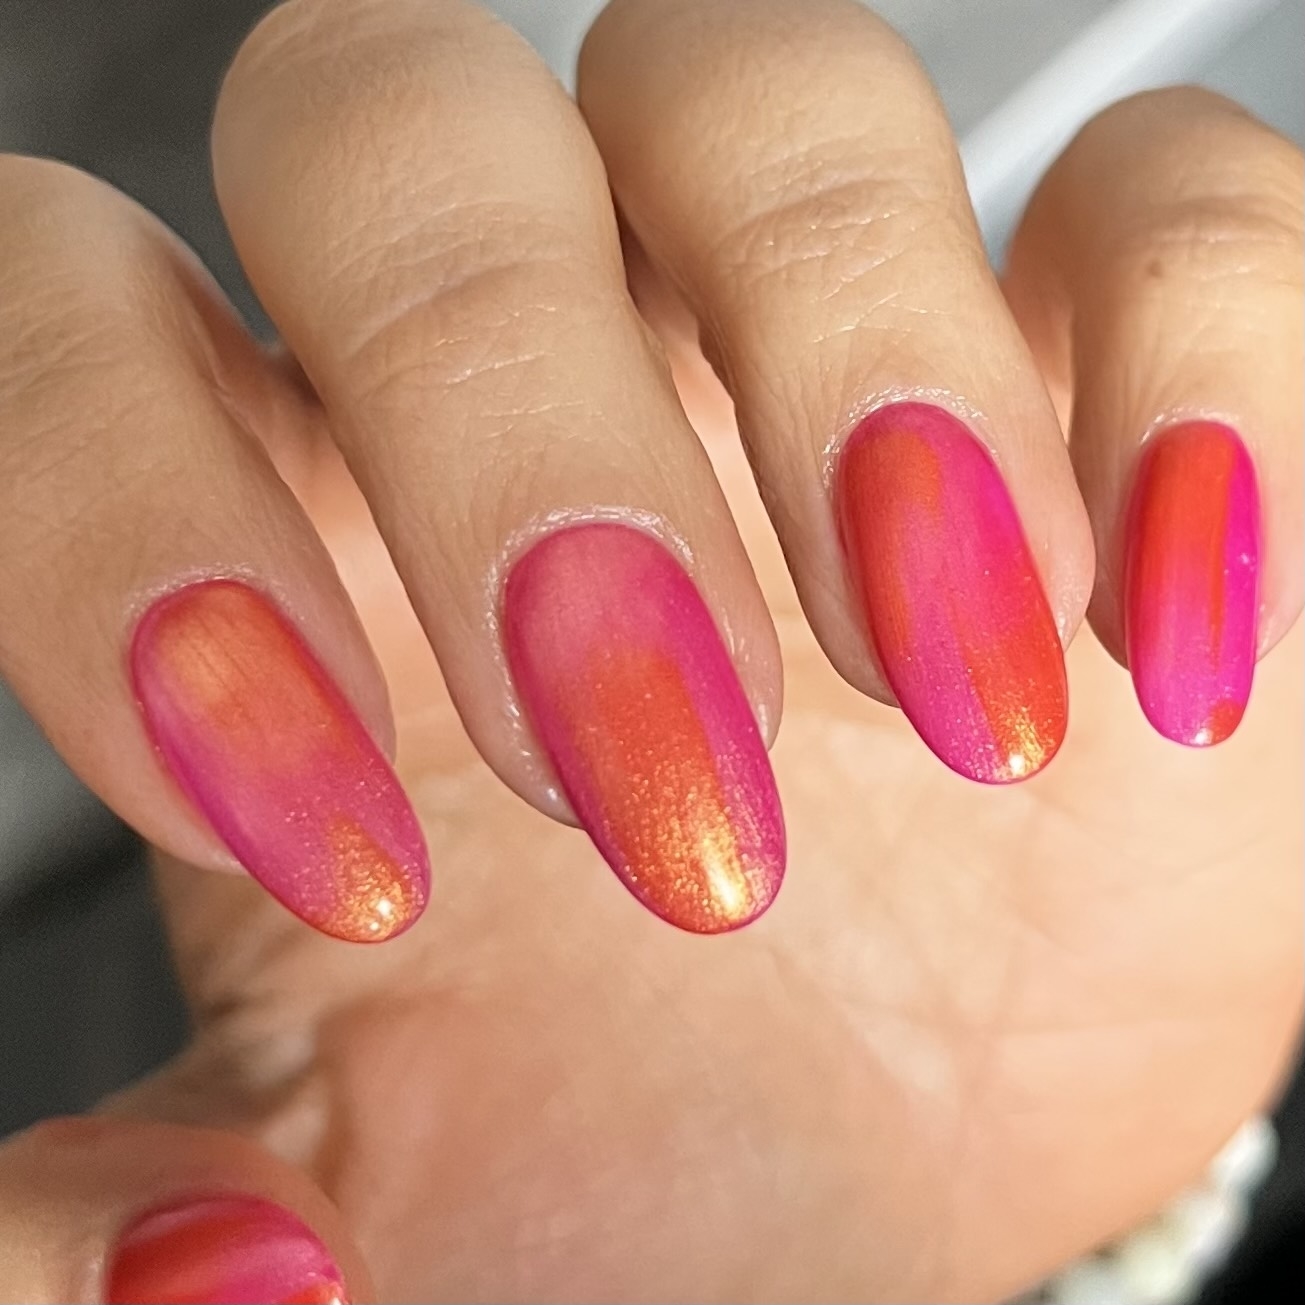 Hand displaying nails with a gradient polish from purple to orange